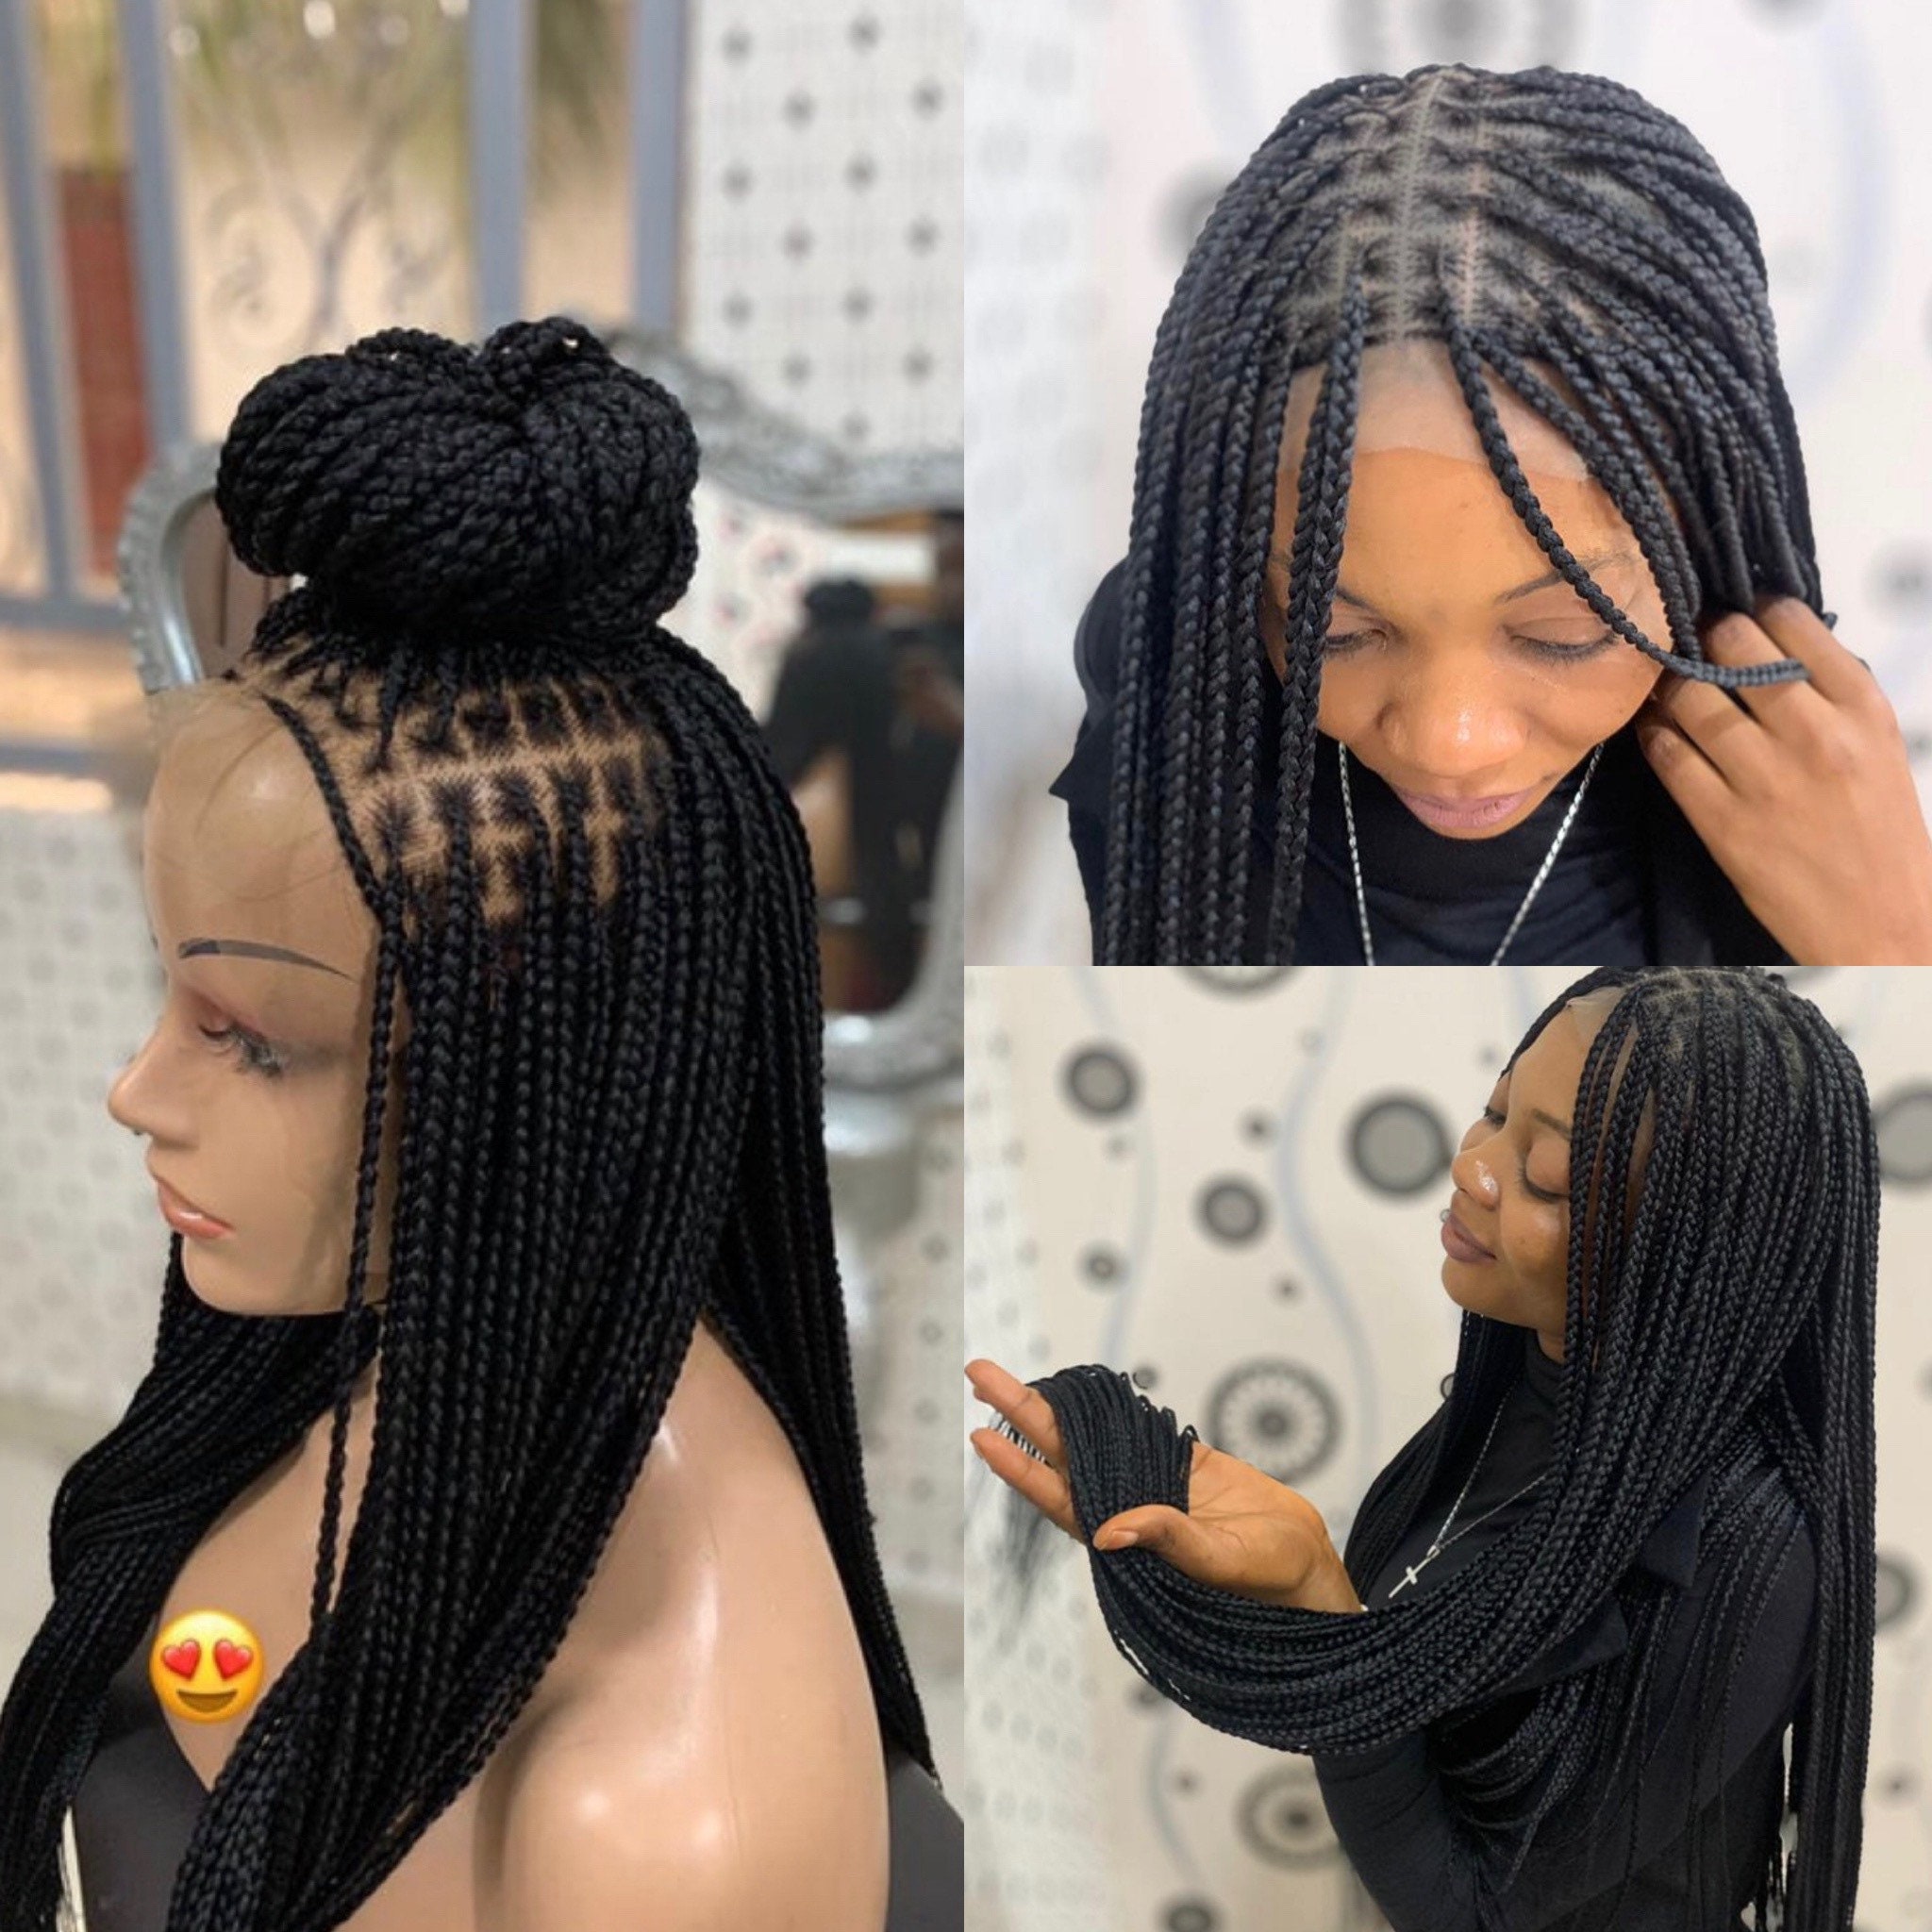 Knotless Braids. Braided Wig. Length is 26inches.made on a | Etsy